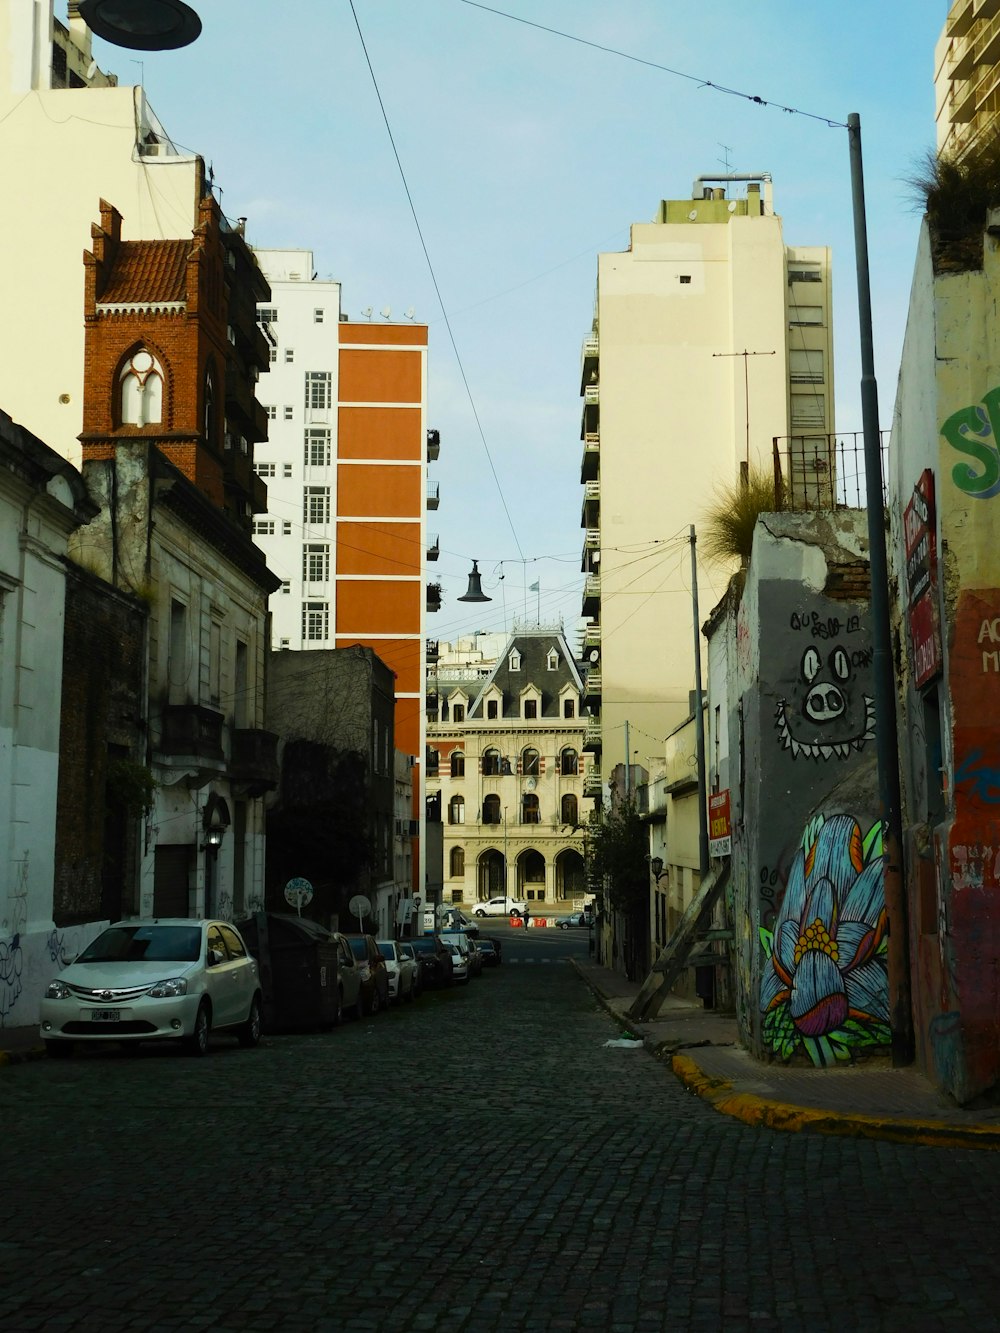 a city street with a bunch of graffiti on the buildings